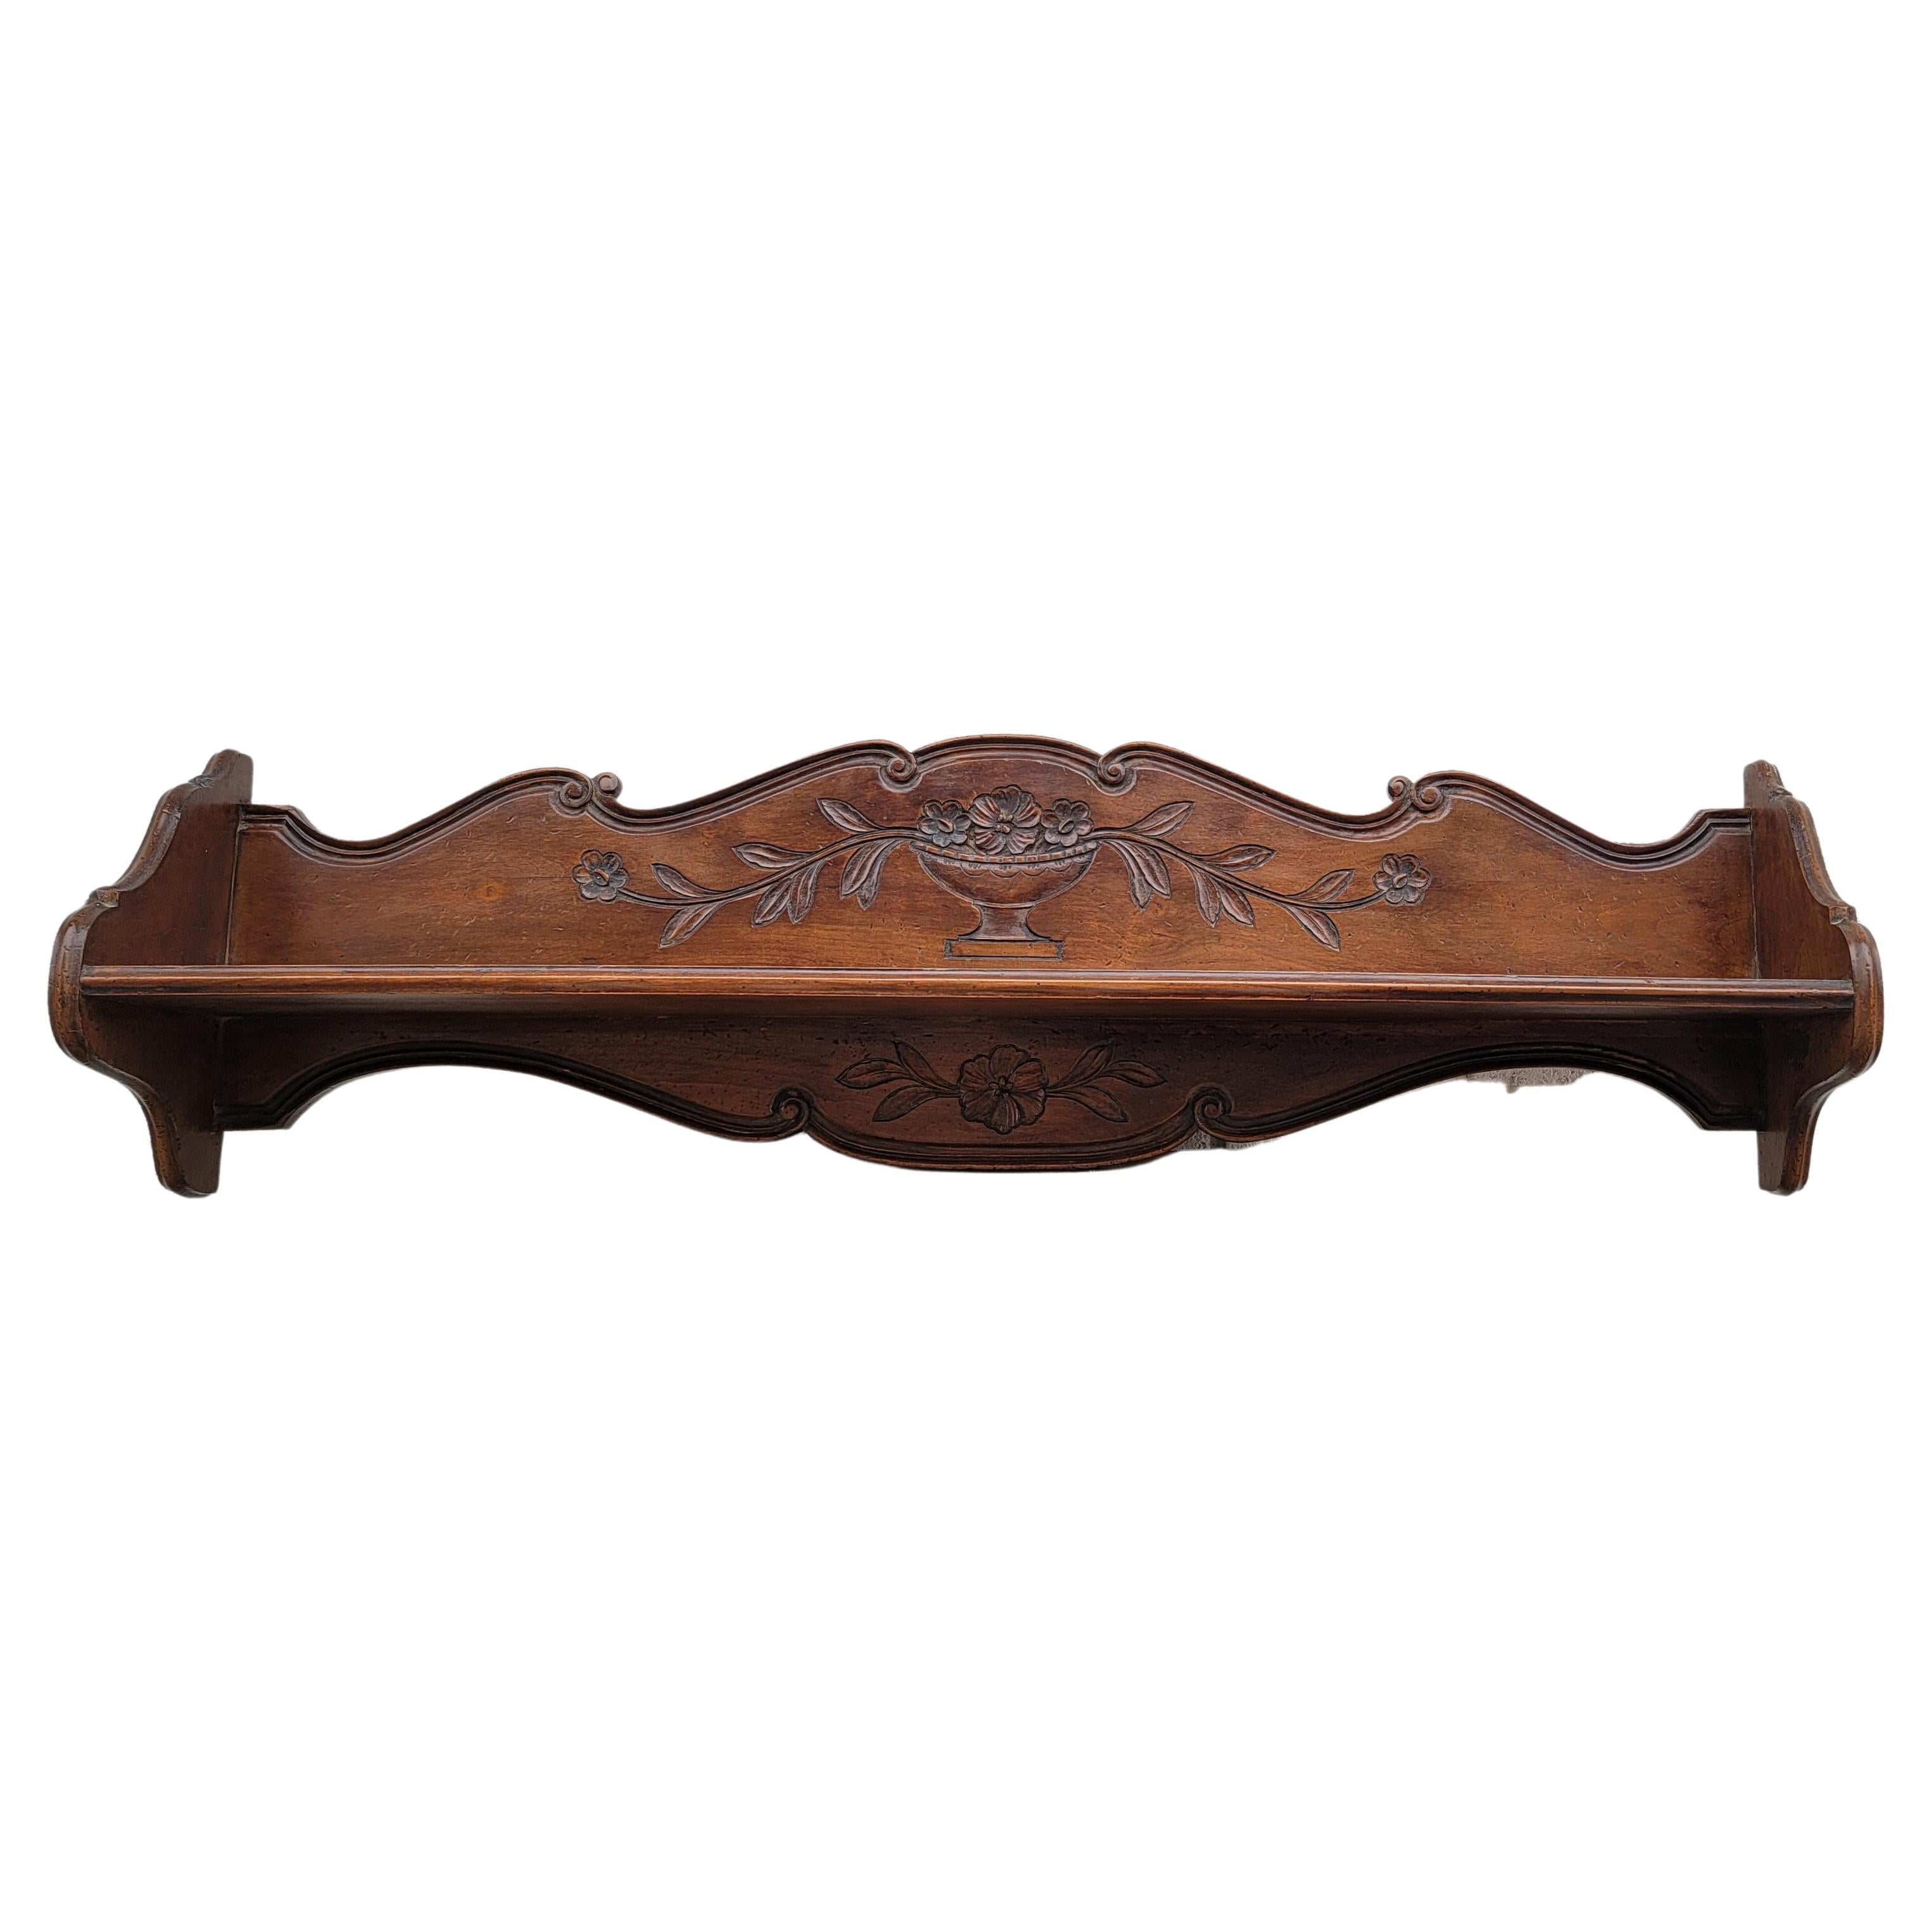 Large 47 inches Vintage, hand carved walnut French wall shelf. 
Numbered item made in France exclusively for Bloomingdale in the 1960s. 
Very good vintage condition.
Measures 47.25